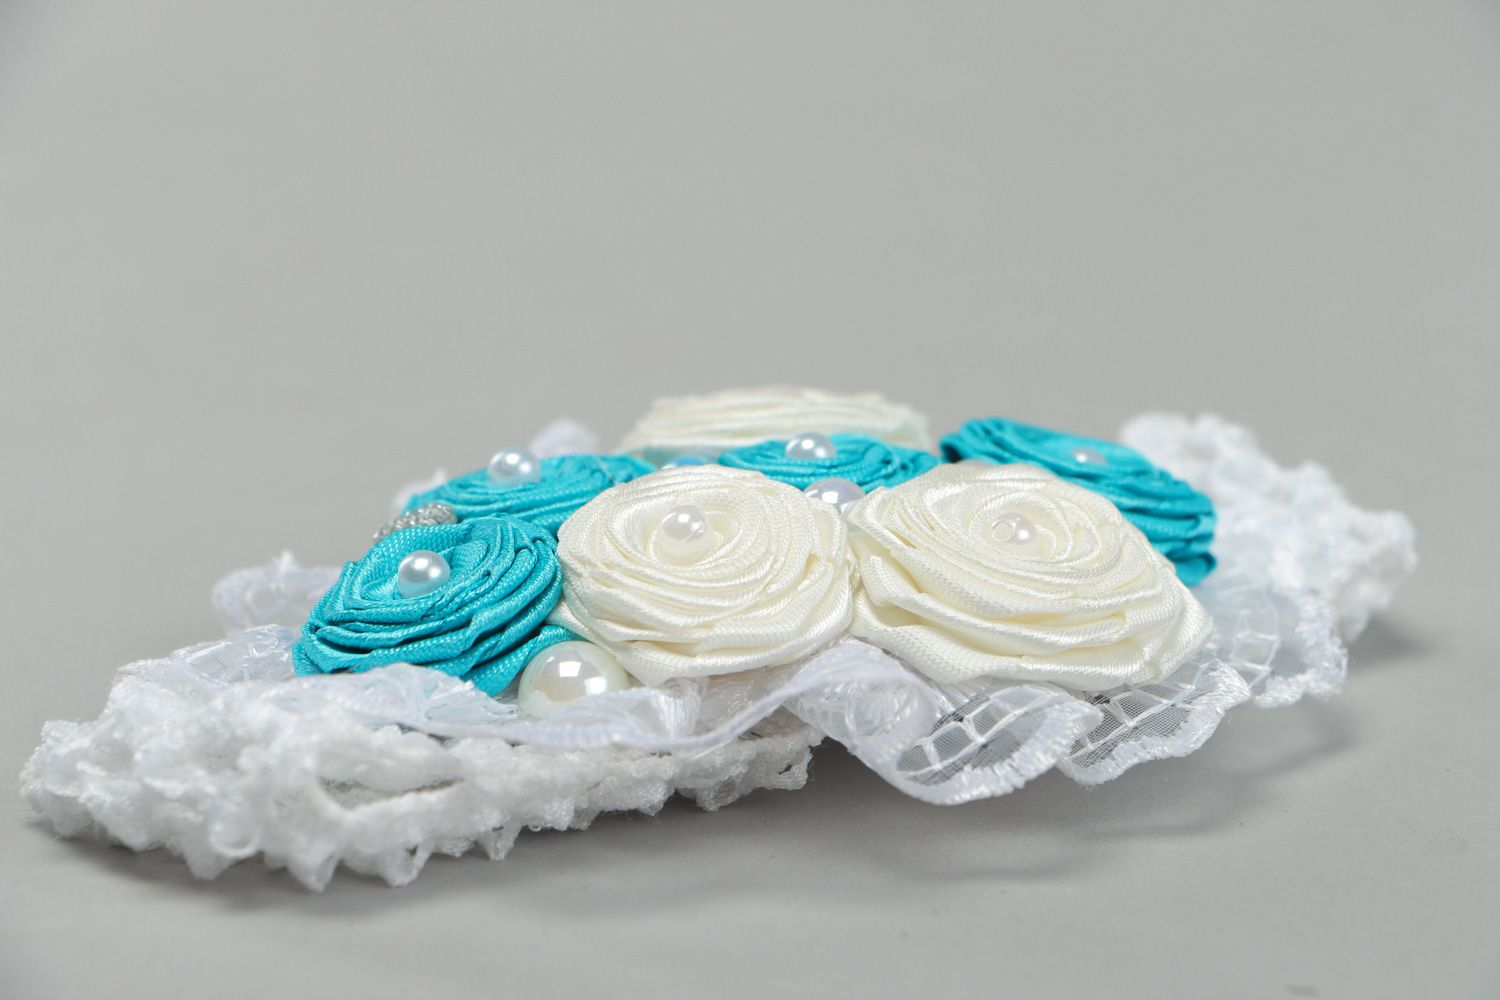 Stylish handmade floral headband with satin ribbons in white and blue colors photo 2